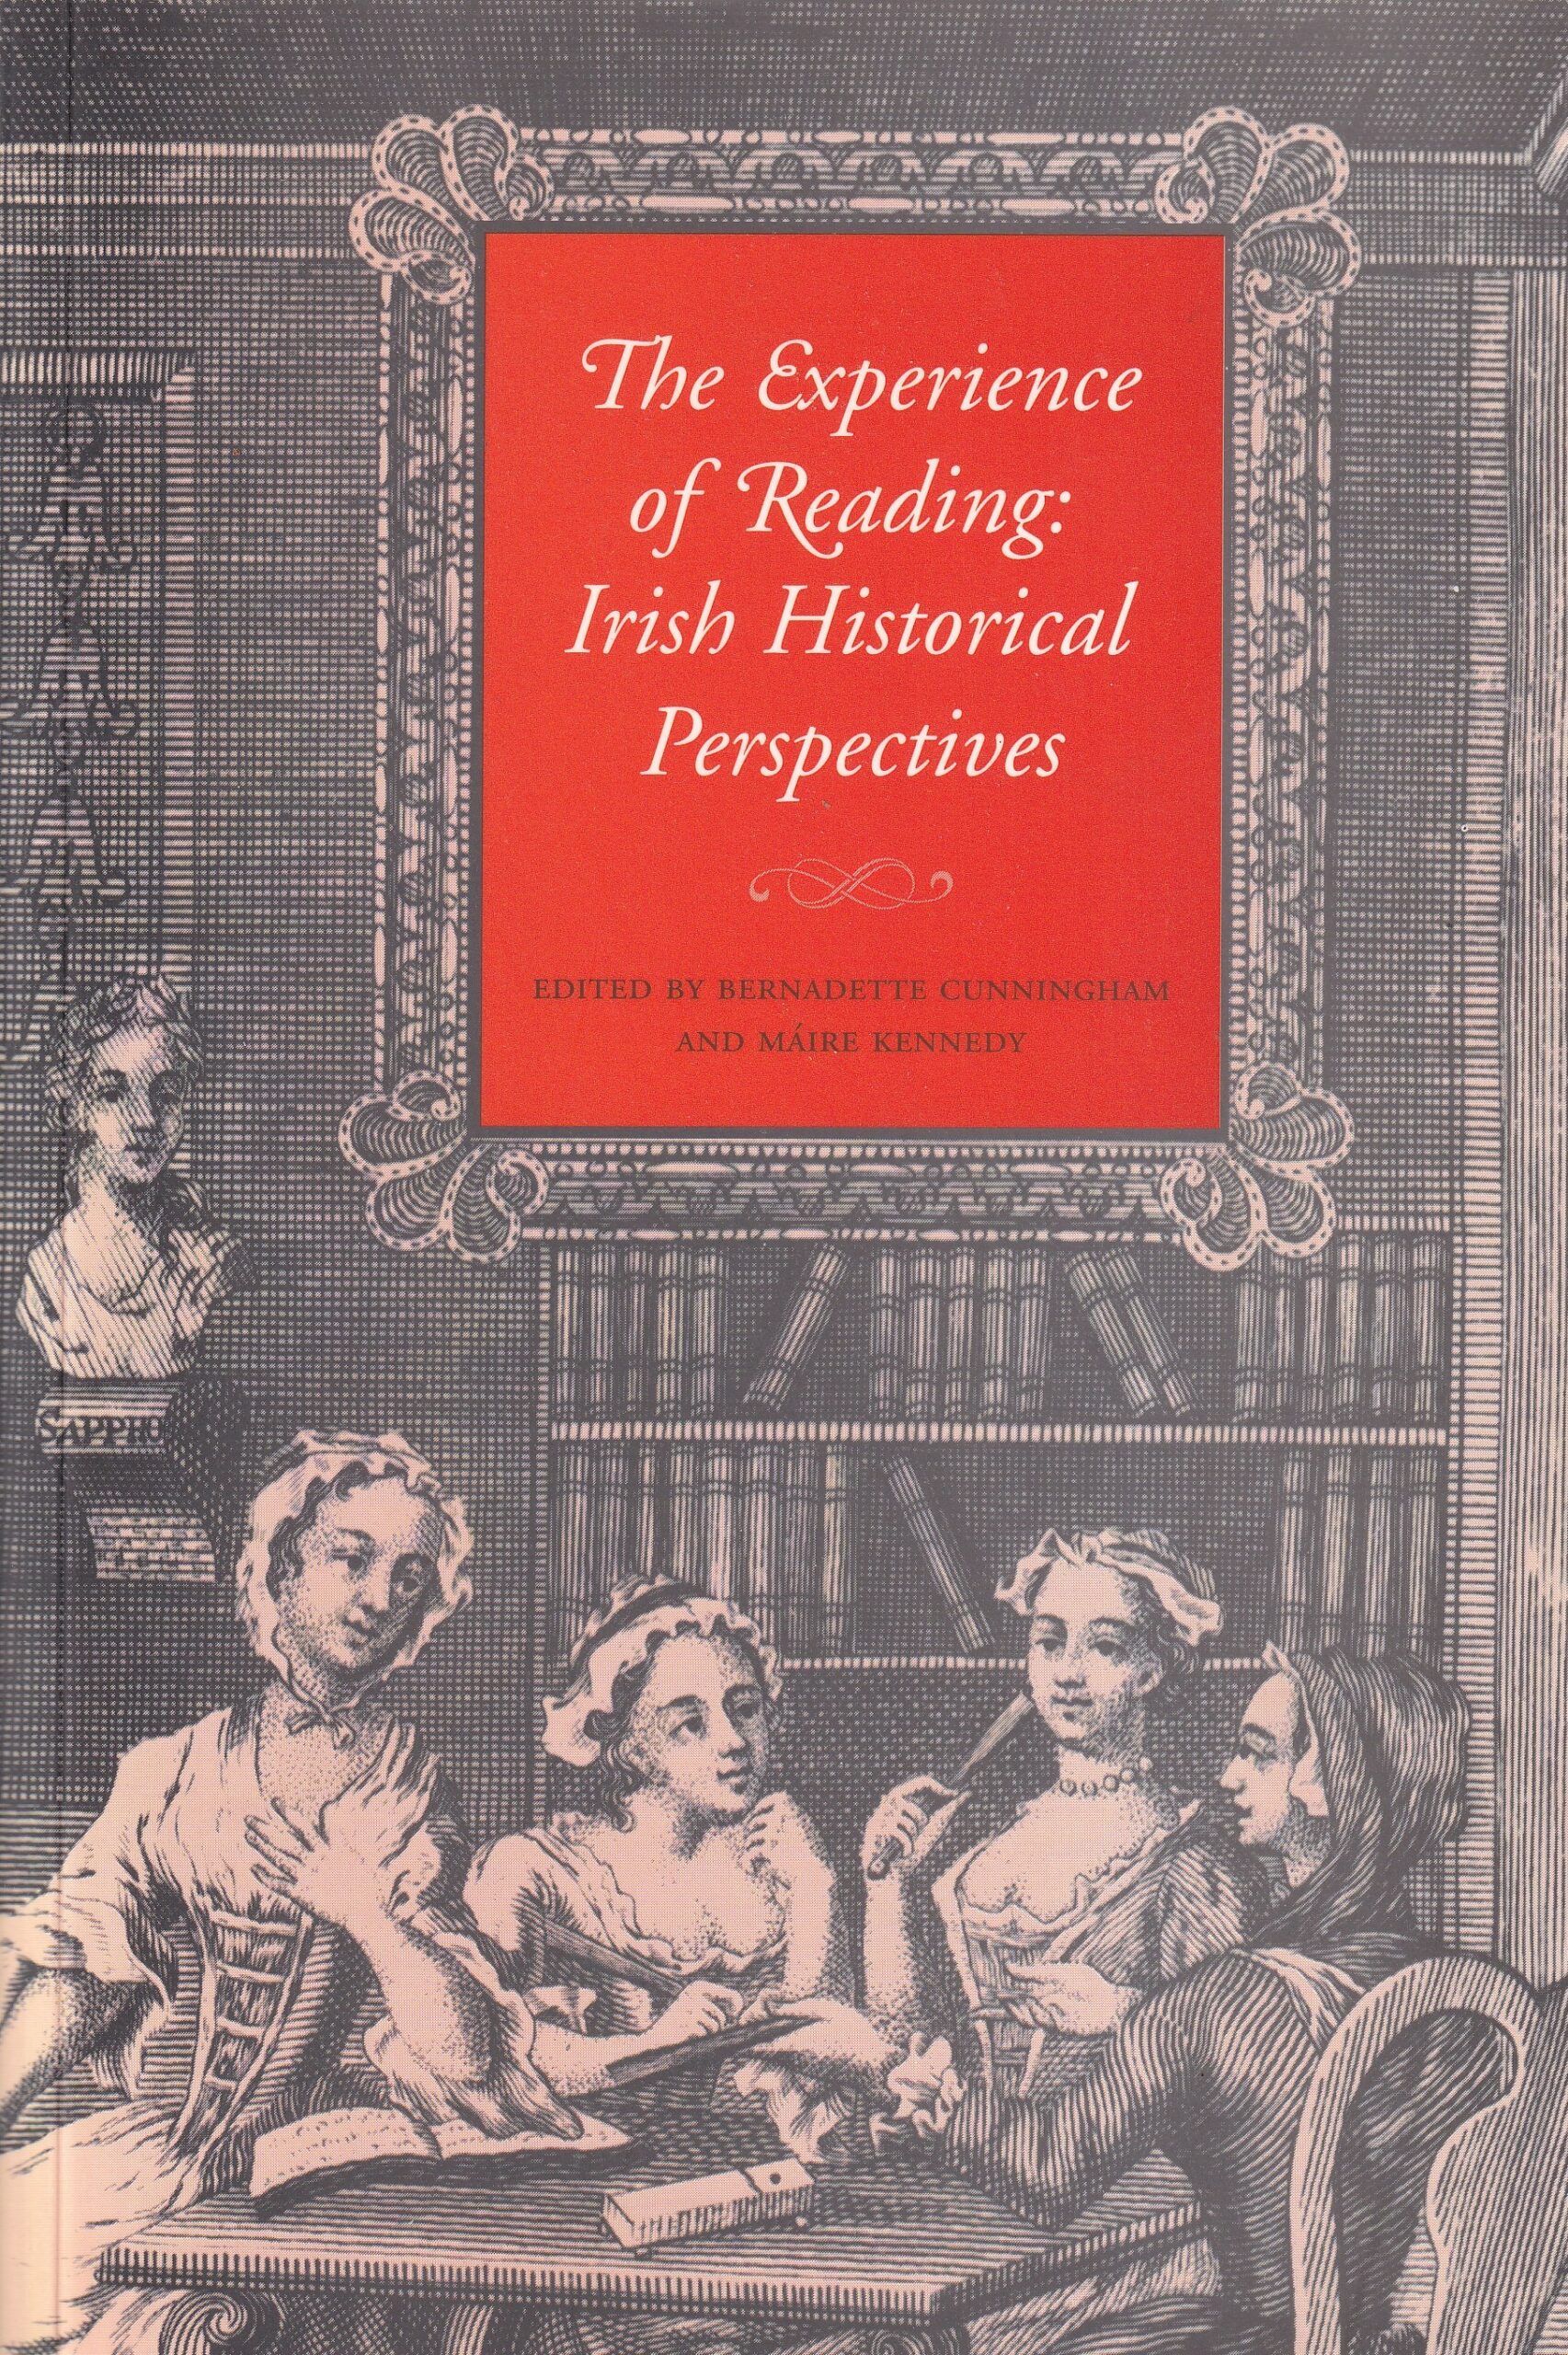 The Experience of Reading: Irish Historical Perspectives by Bernadette Cunningham and Máire Kennedy (eds.)